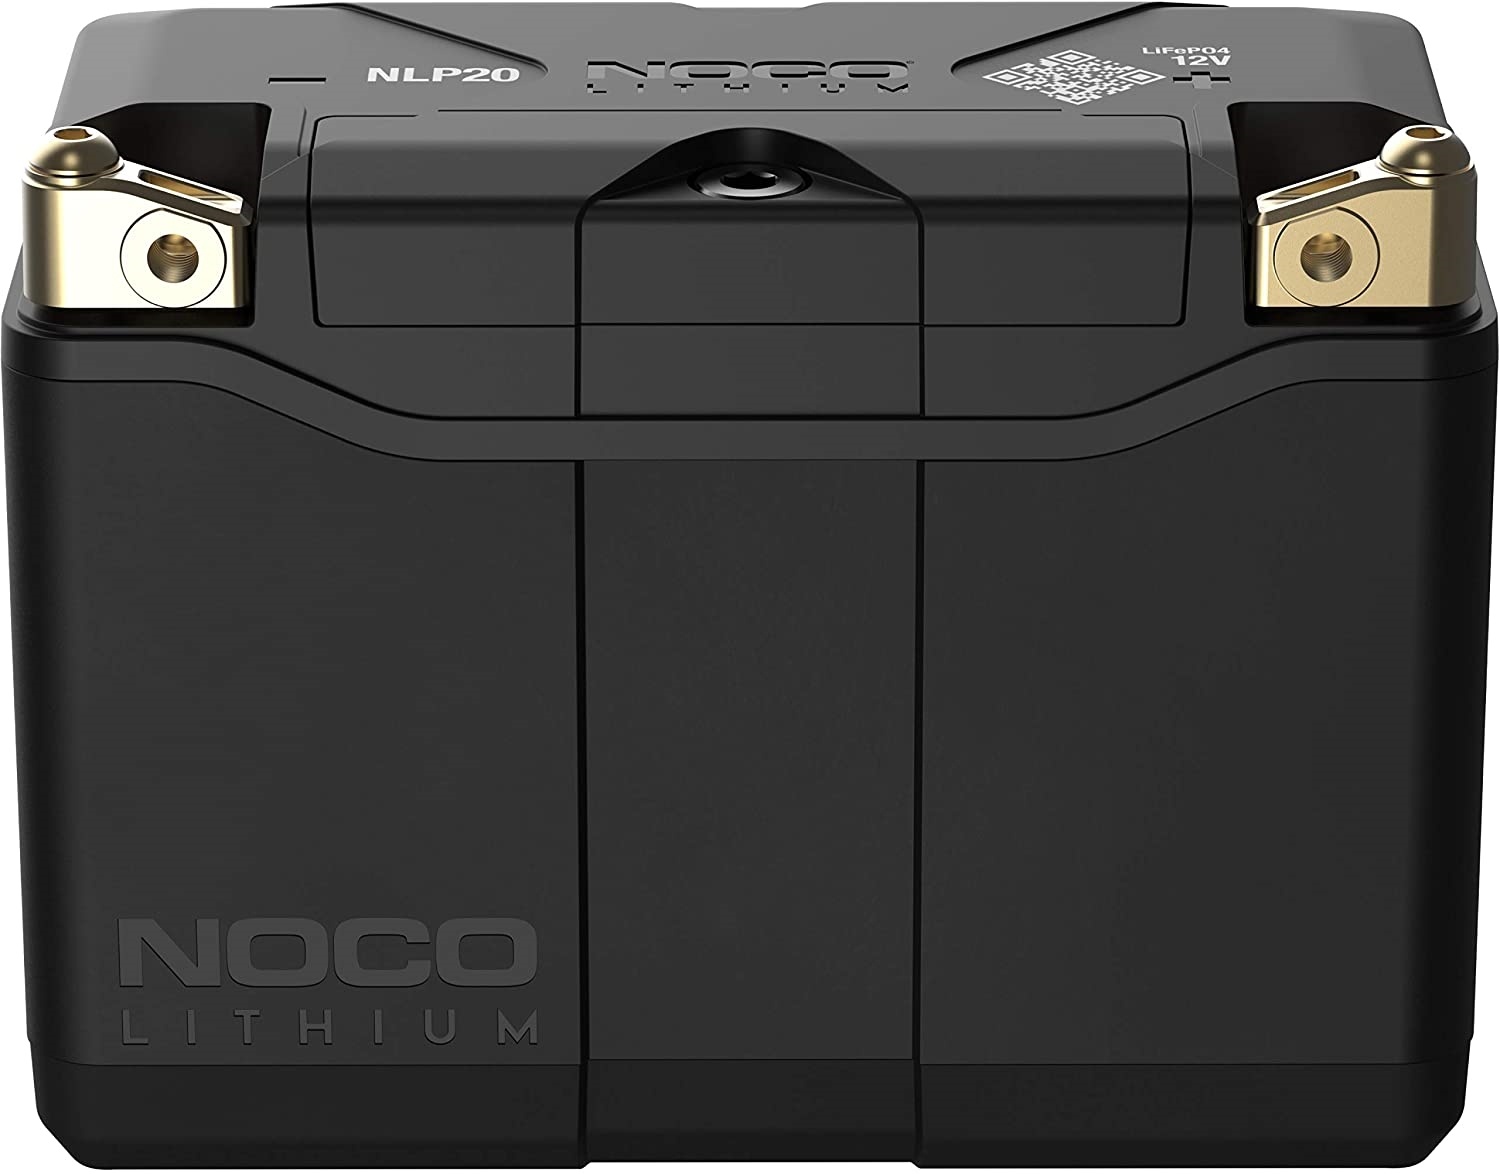 Noco NLP20 12V 600A Lithium Powersports Battery